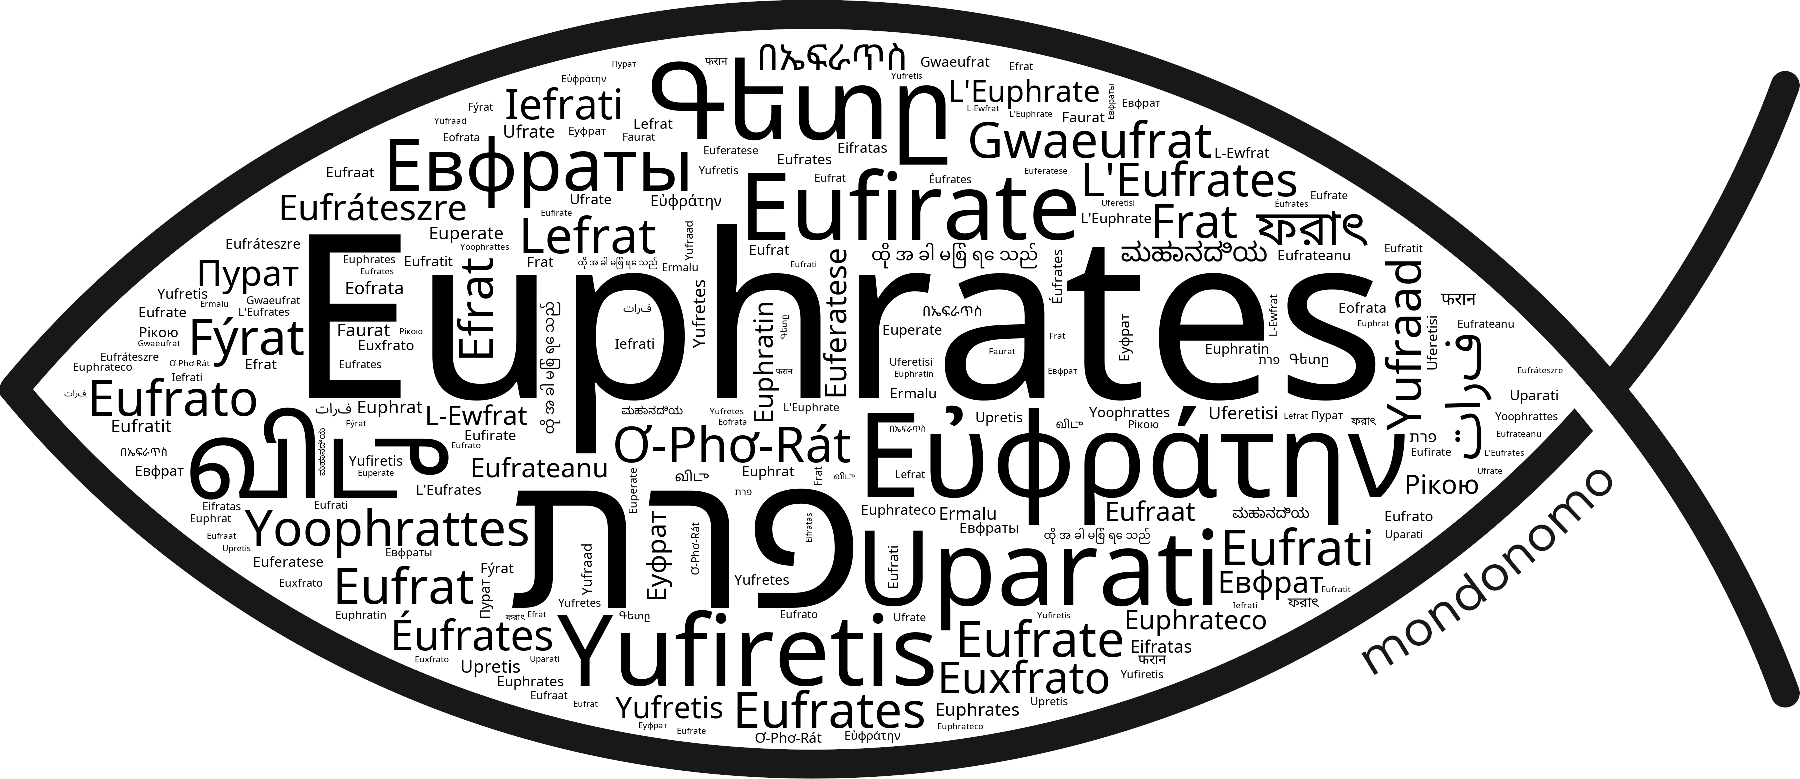 Name Euphrates in the world's Bibles